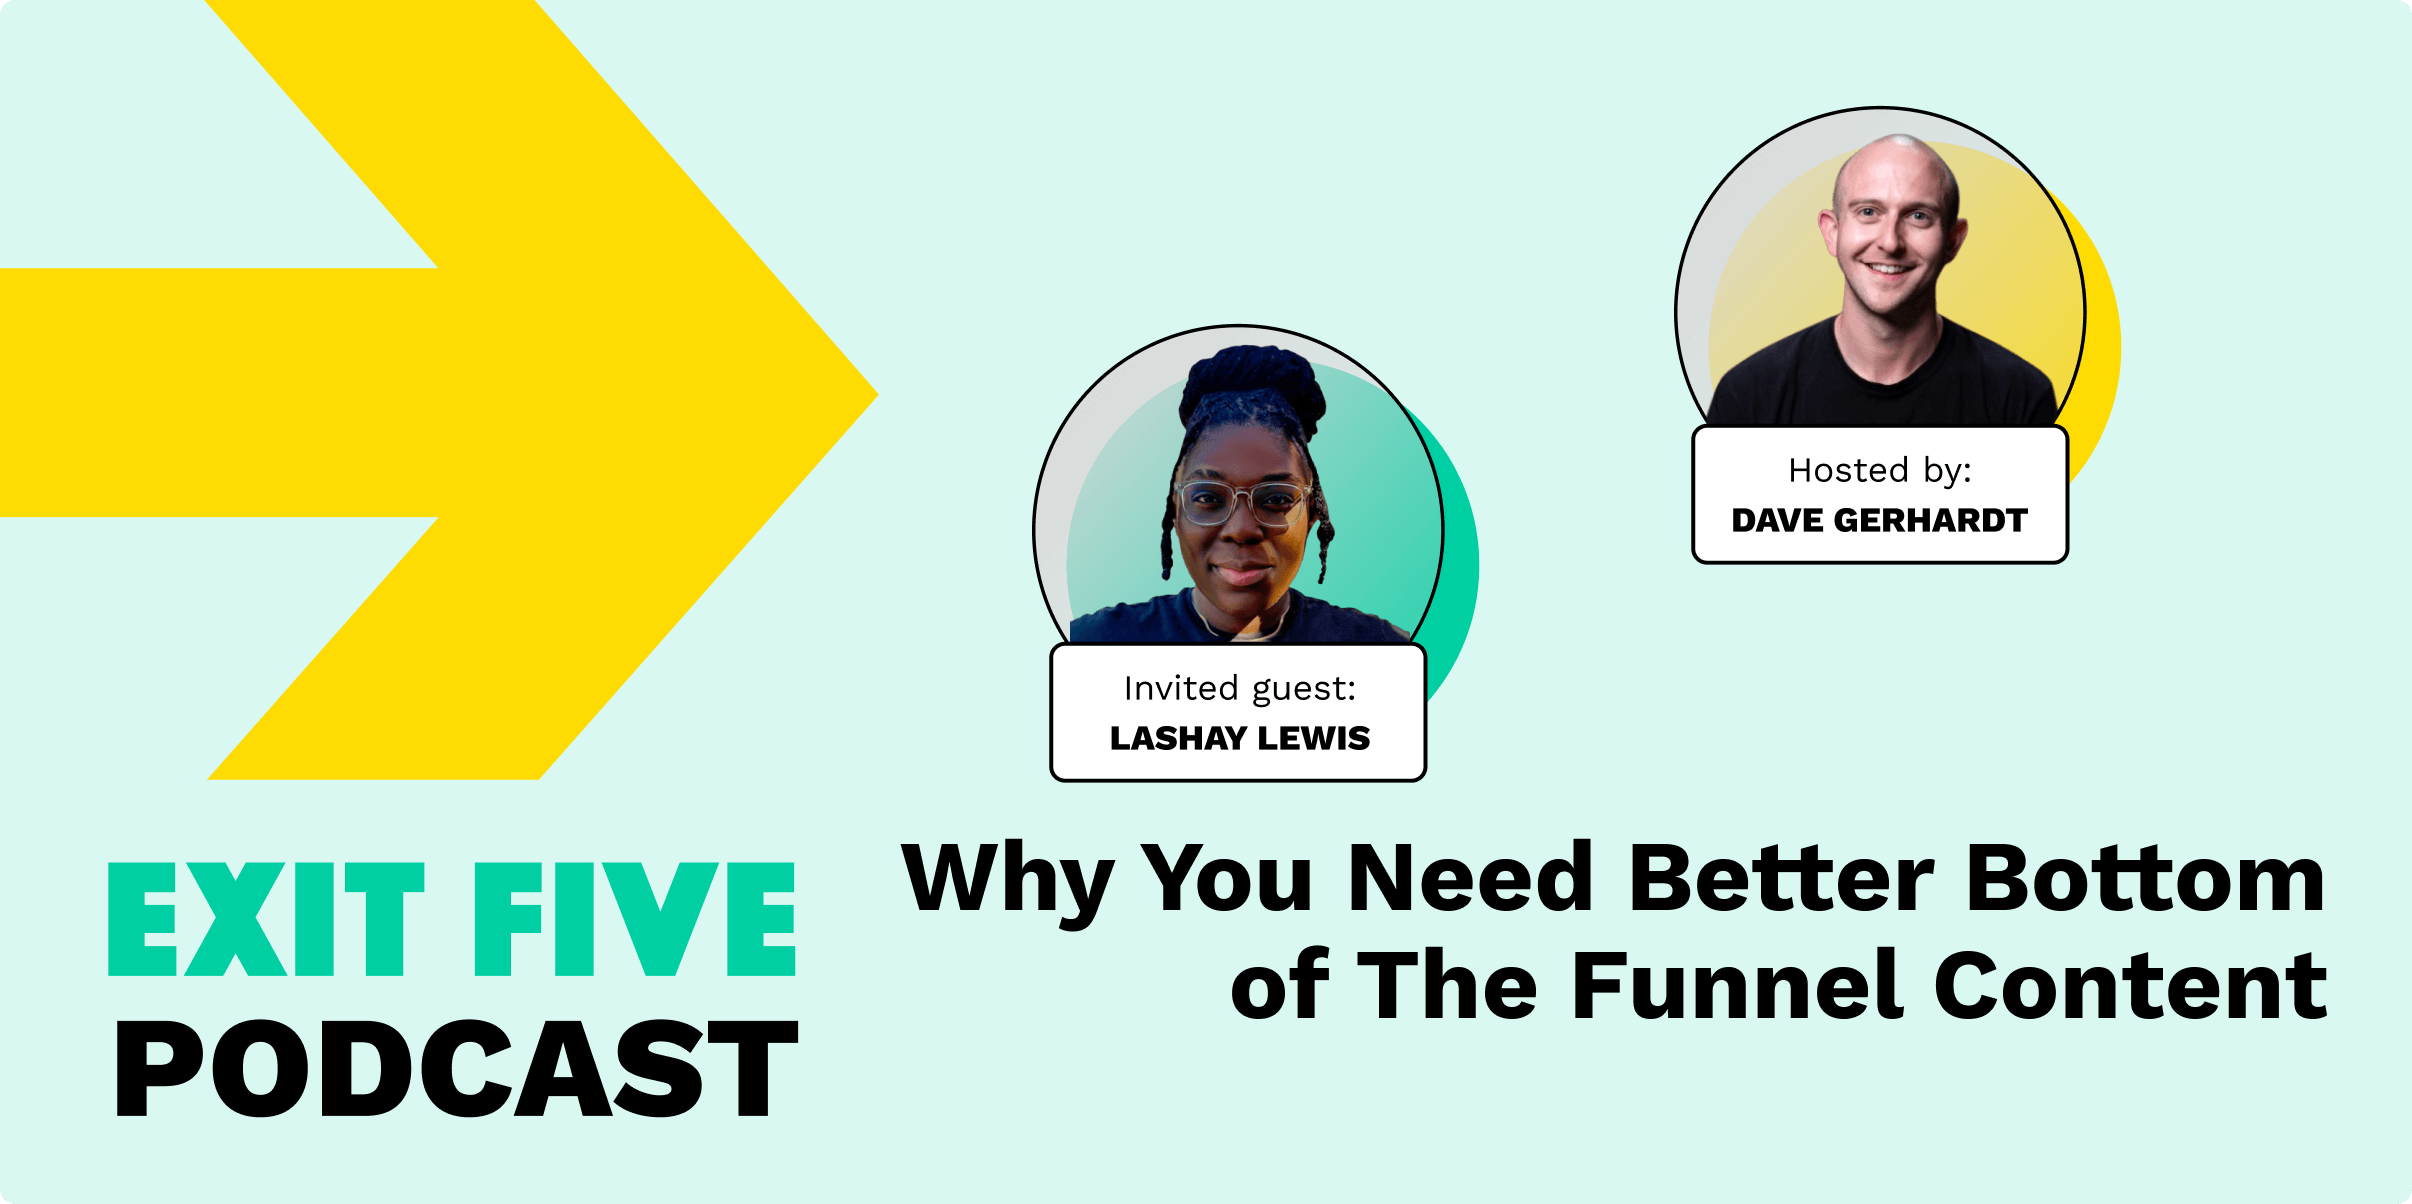 Why You Need Better Bottom of The Funnel Content with Lashay Lewis